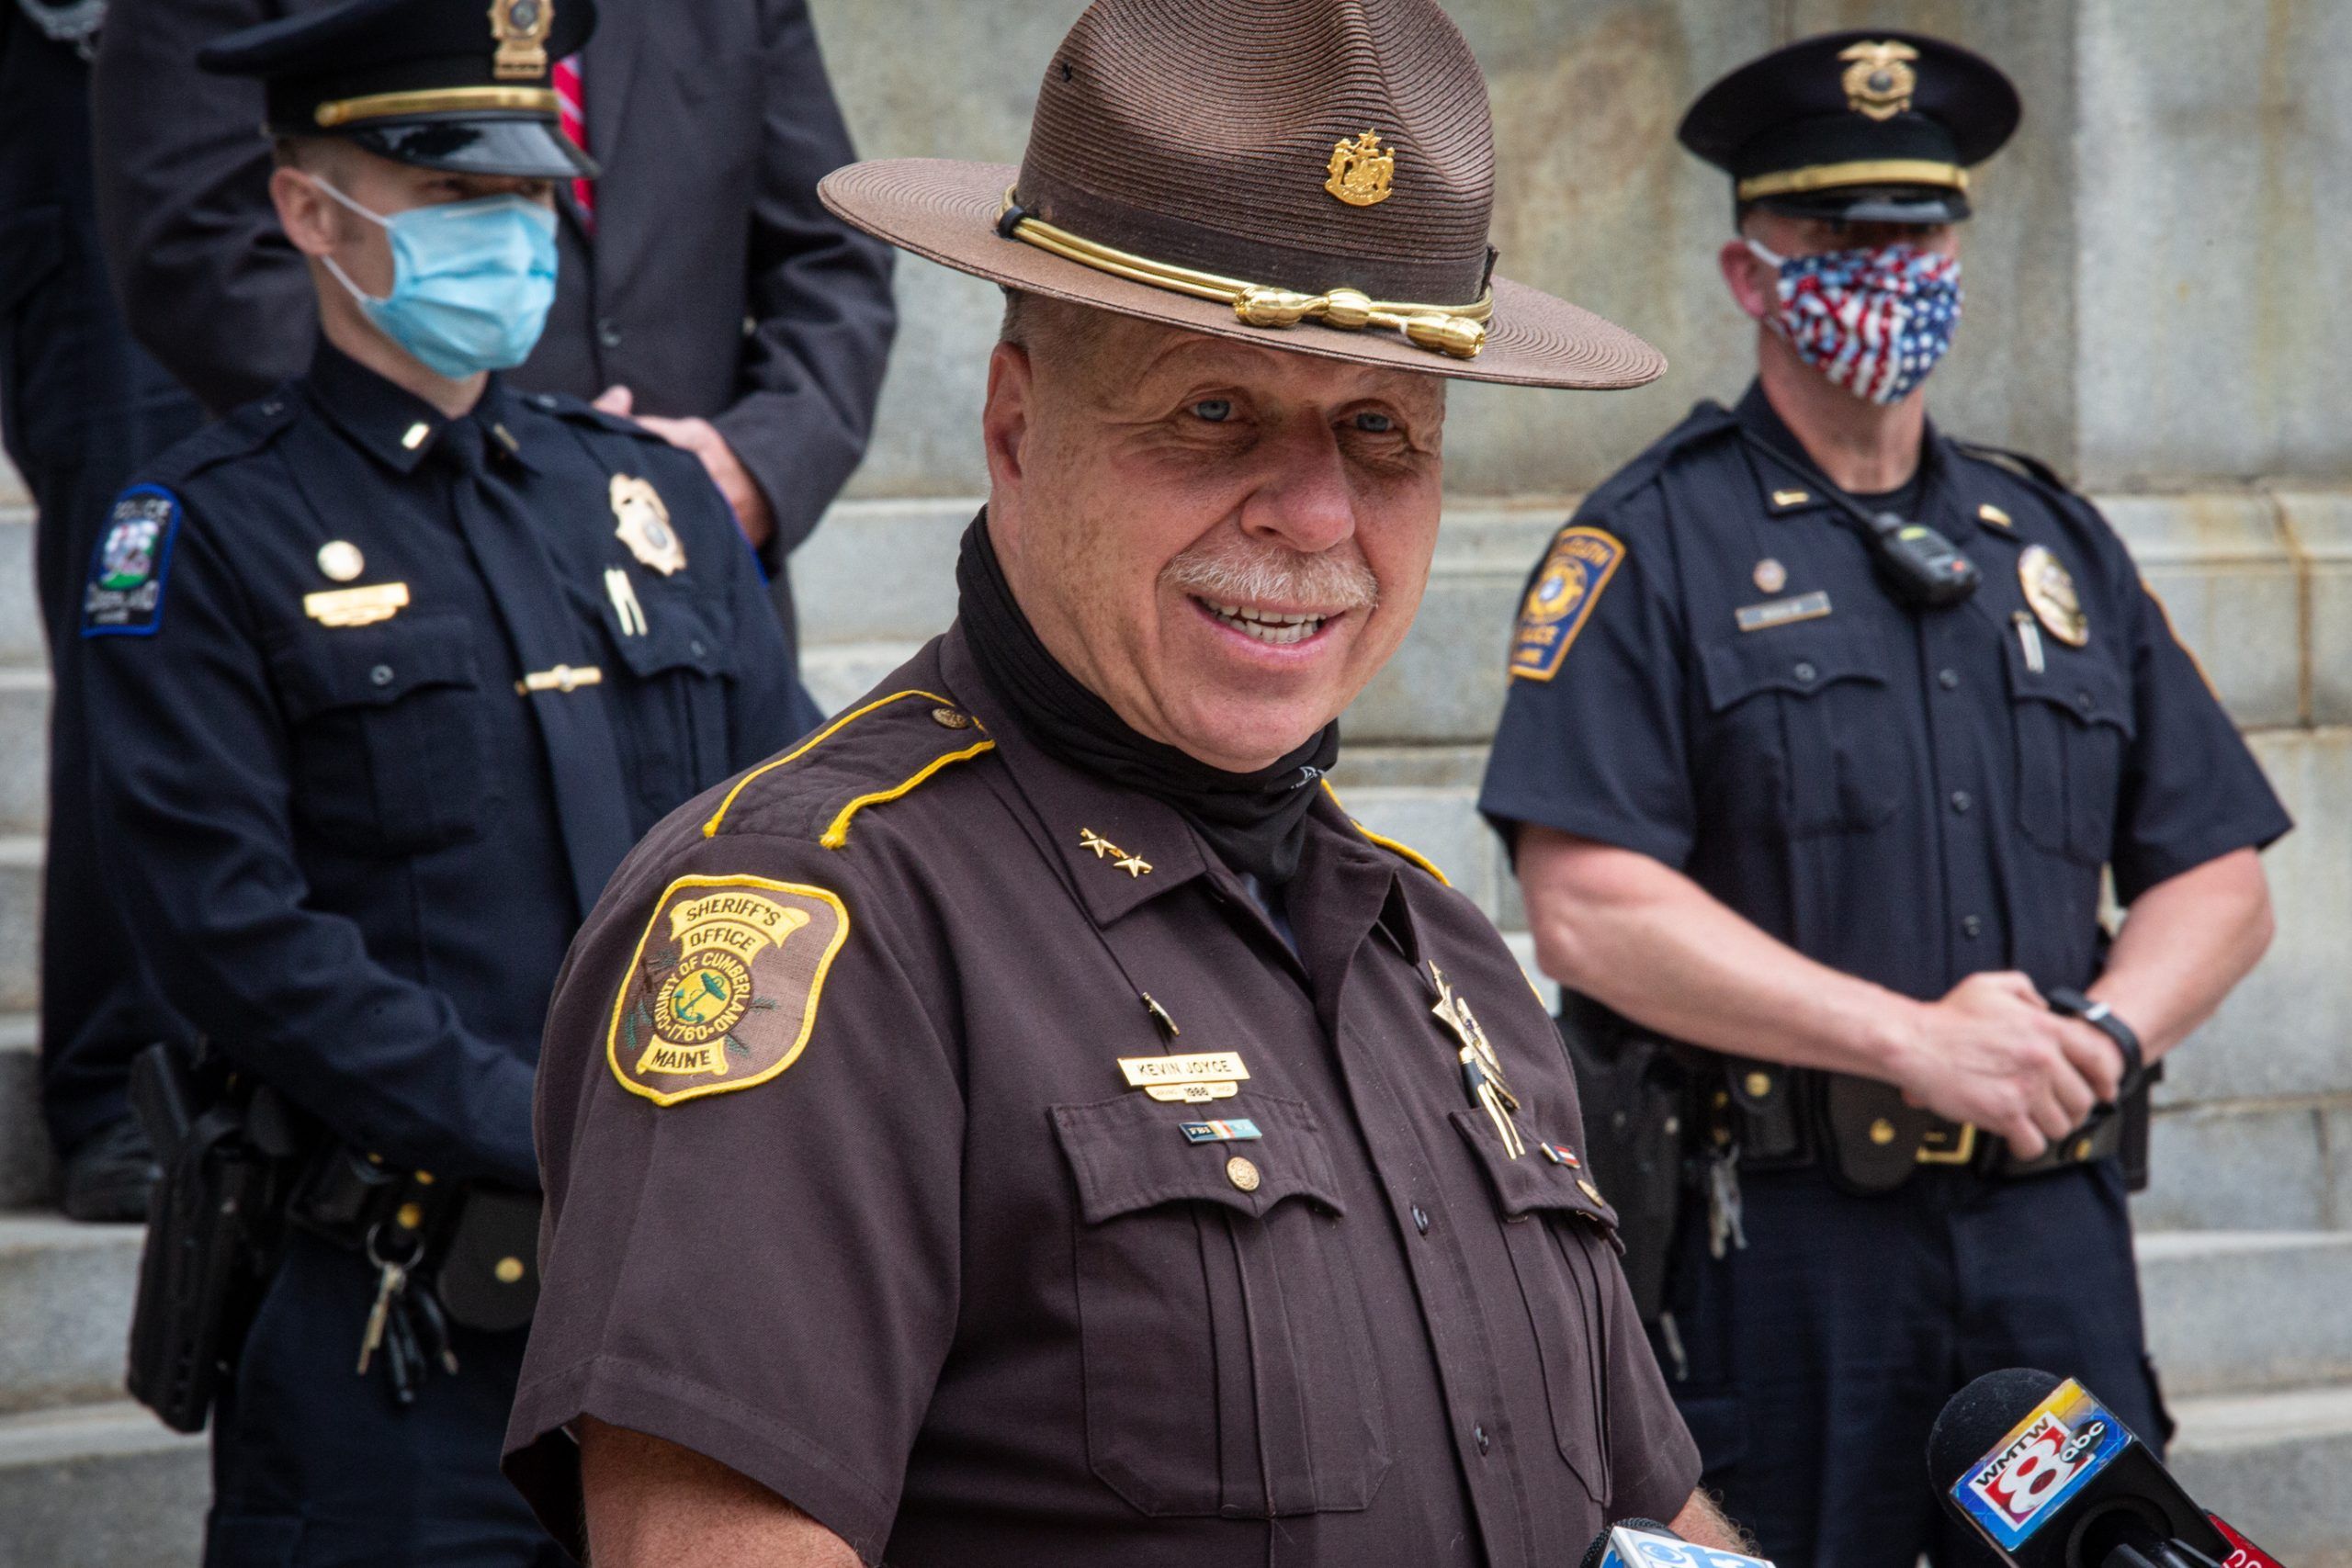 Cumberland County Sheriff Kevin Joyce speaks at a press conference outside Portland City Hall on June 3. Image by Troy R. Bennett / Bangor Daily News. United States, 2020.